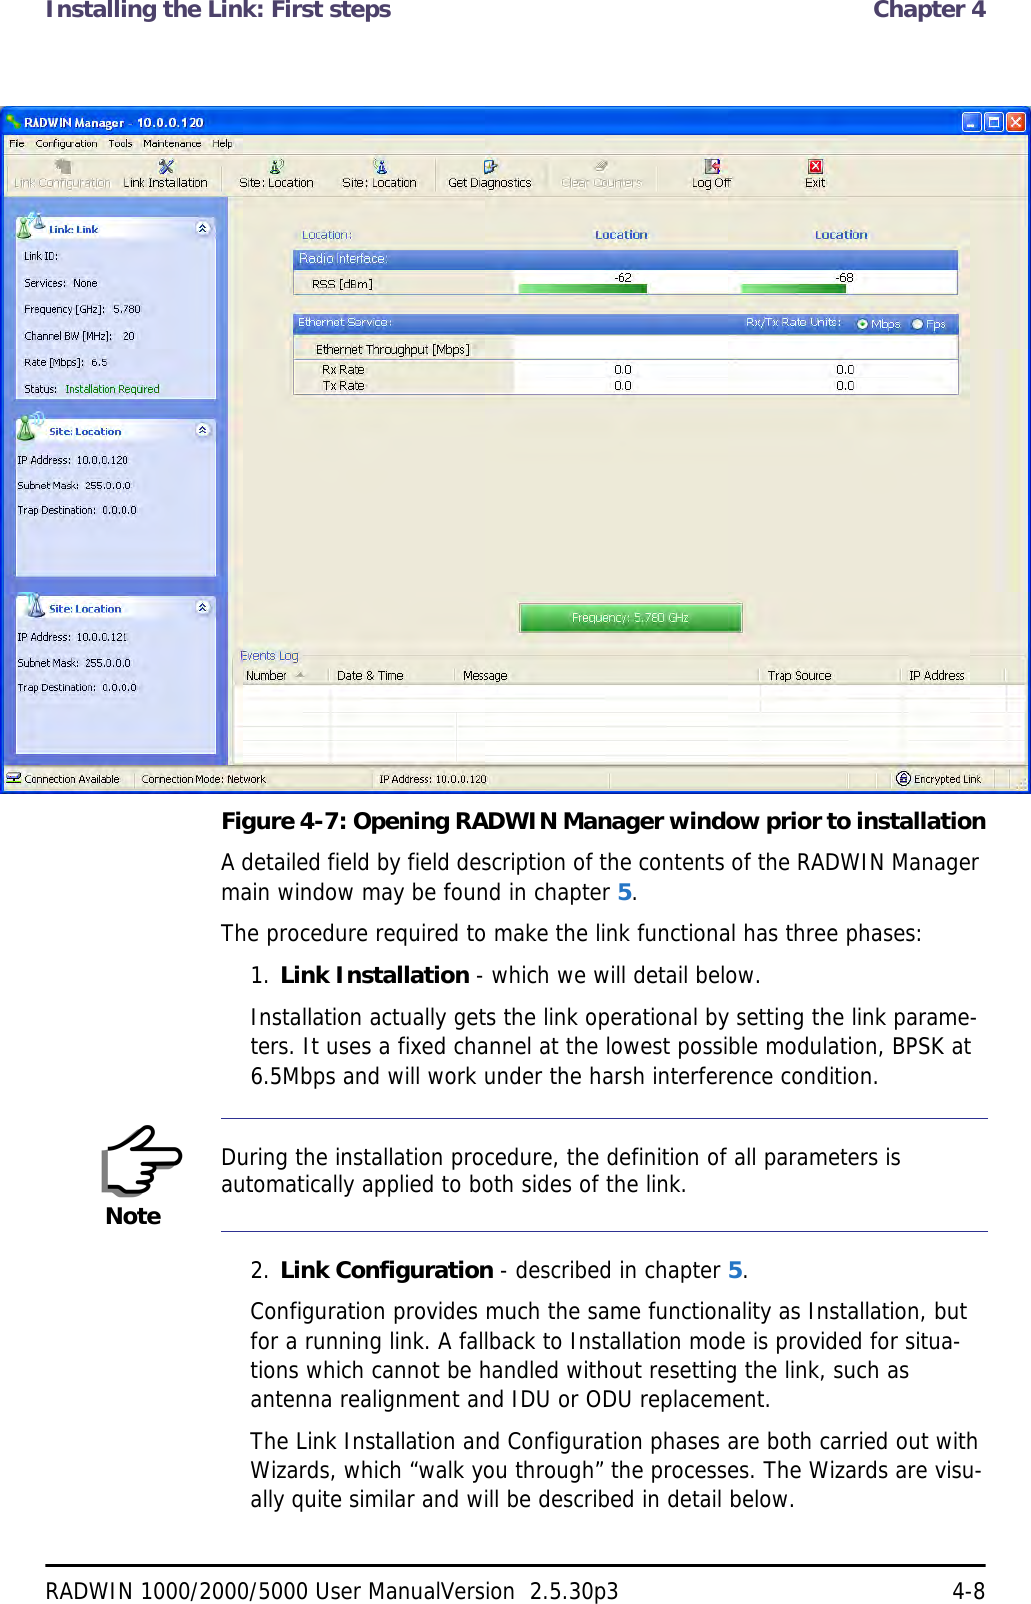 Installing the Link: First steps  Chapter 4RADWIN 1000/2000/5000 User ManualVersion  2.5.30p3 4-8Figure 4-7: Opening RADWIN Manager window prior to installationA detailed field by field description of the contents of the RADWIN Manager main window may be found in chapter 5.The procedure required to make the link functional has three phases:1. Link Installation - which we will detail below.Installation actually gets the link operational by setting the link parame-ters. It uses a fixed channel at the lowest possible modulation, BPSK at 6.5Mbps and will work under the harsh interference condition. 2. Link Configuration - described in chapter 5.Configuration provides much the same functionality as Installation, but for a running link. A fallback to Installation mode is provided for situa-tions which cannot be handled without resetting the link, such as antenna realignment and IDU or ODU replacement.The Link Installation and Configuration phases are both carried out with Wizards, which “walk you through” the processes. The Wizards are visu-ally quite similar and will be described in detail below. NoteDuring the installation procedure, the definition of all parameters is automatically applied to both sides of the link.